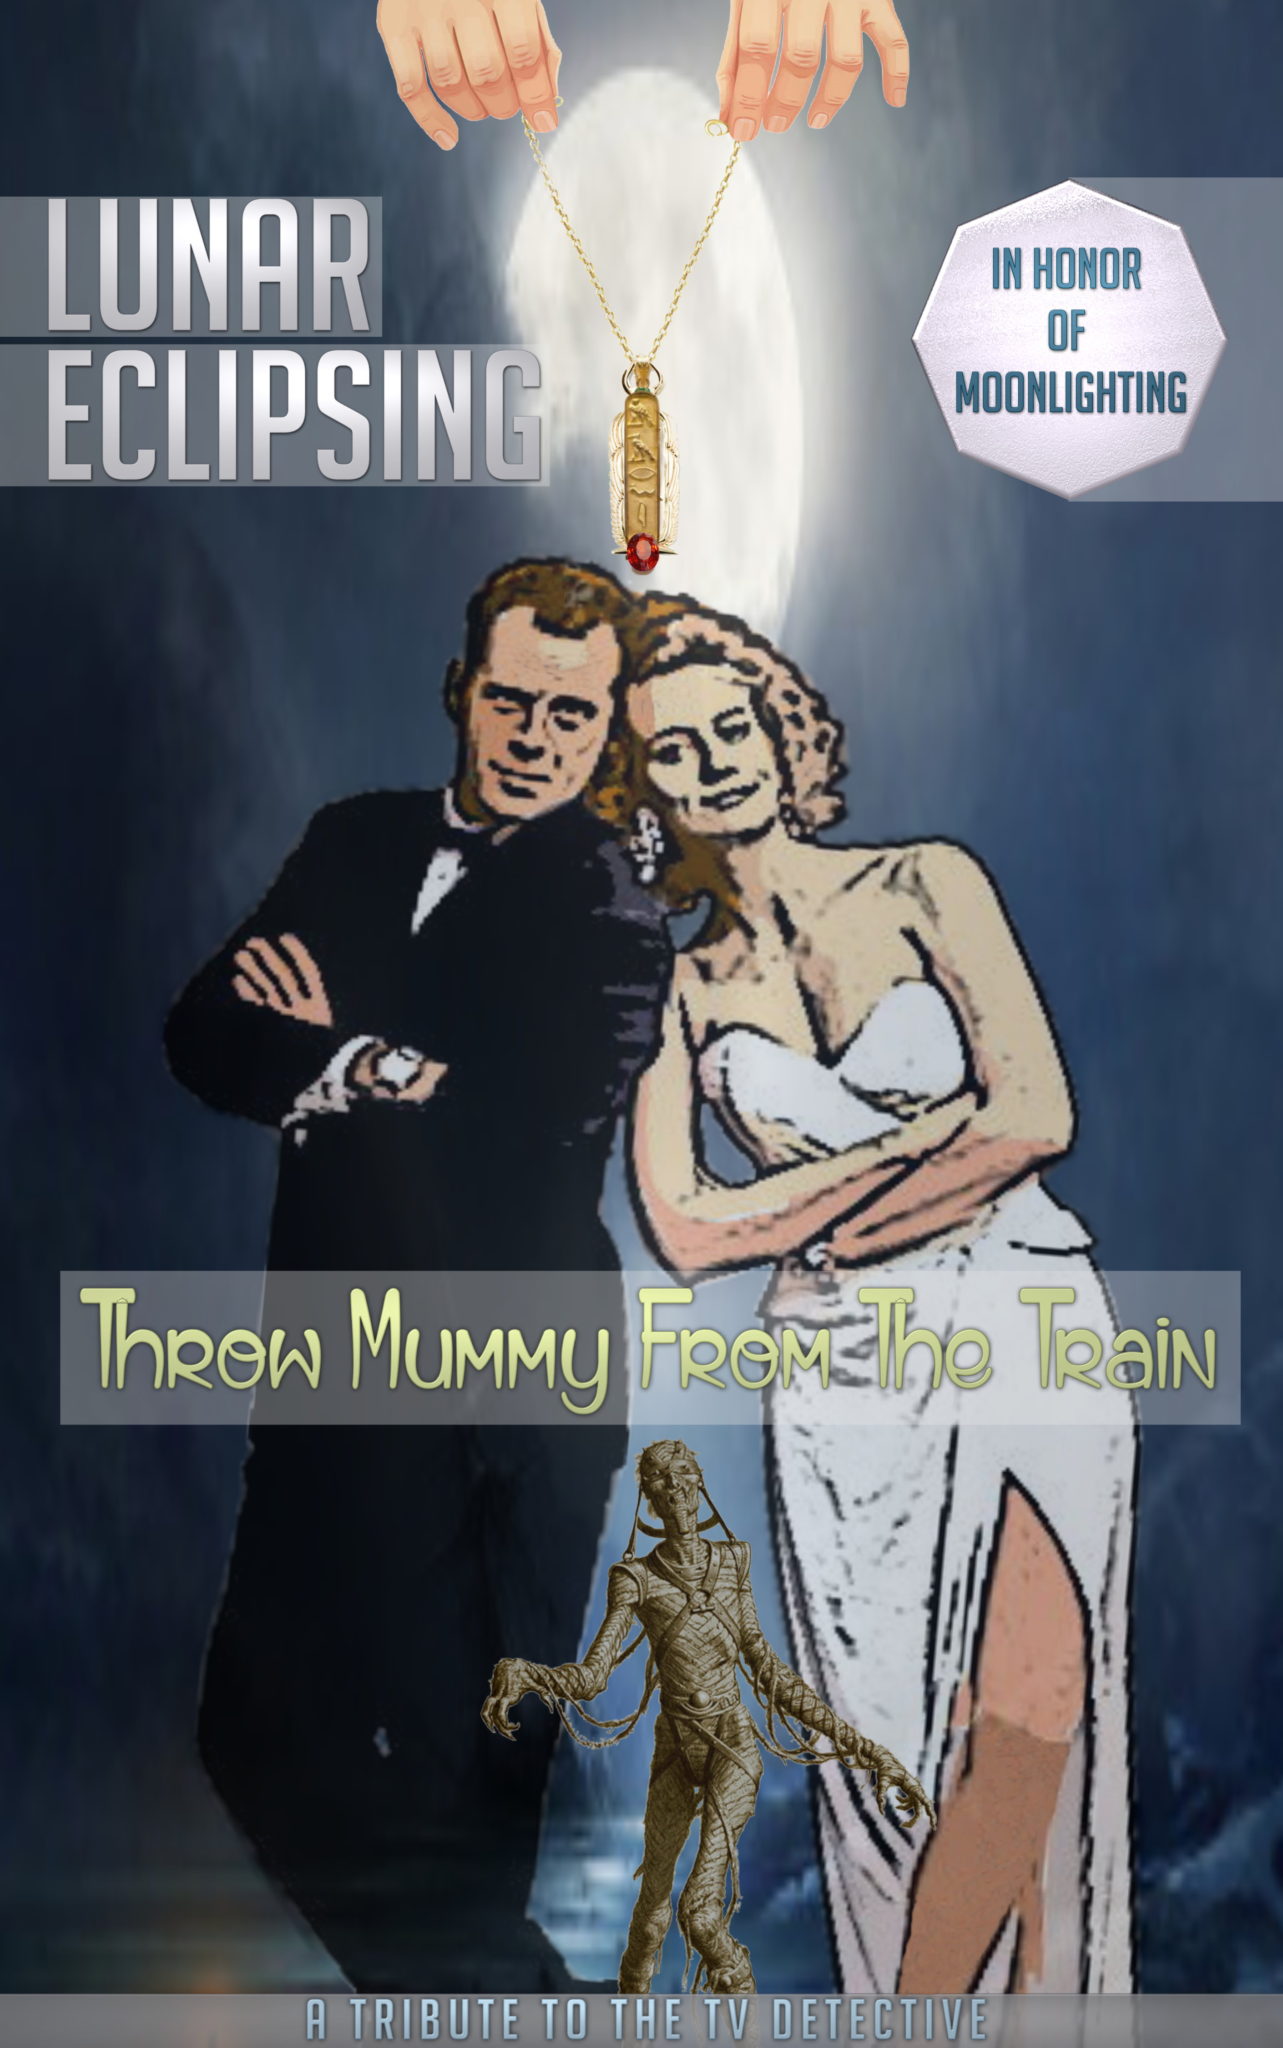 FREE: Lunar Eclipsing – In Honor of Moonlighting: Throw Mummy From the Train by Michael Volpi